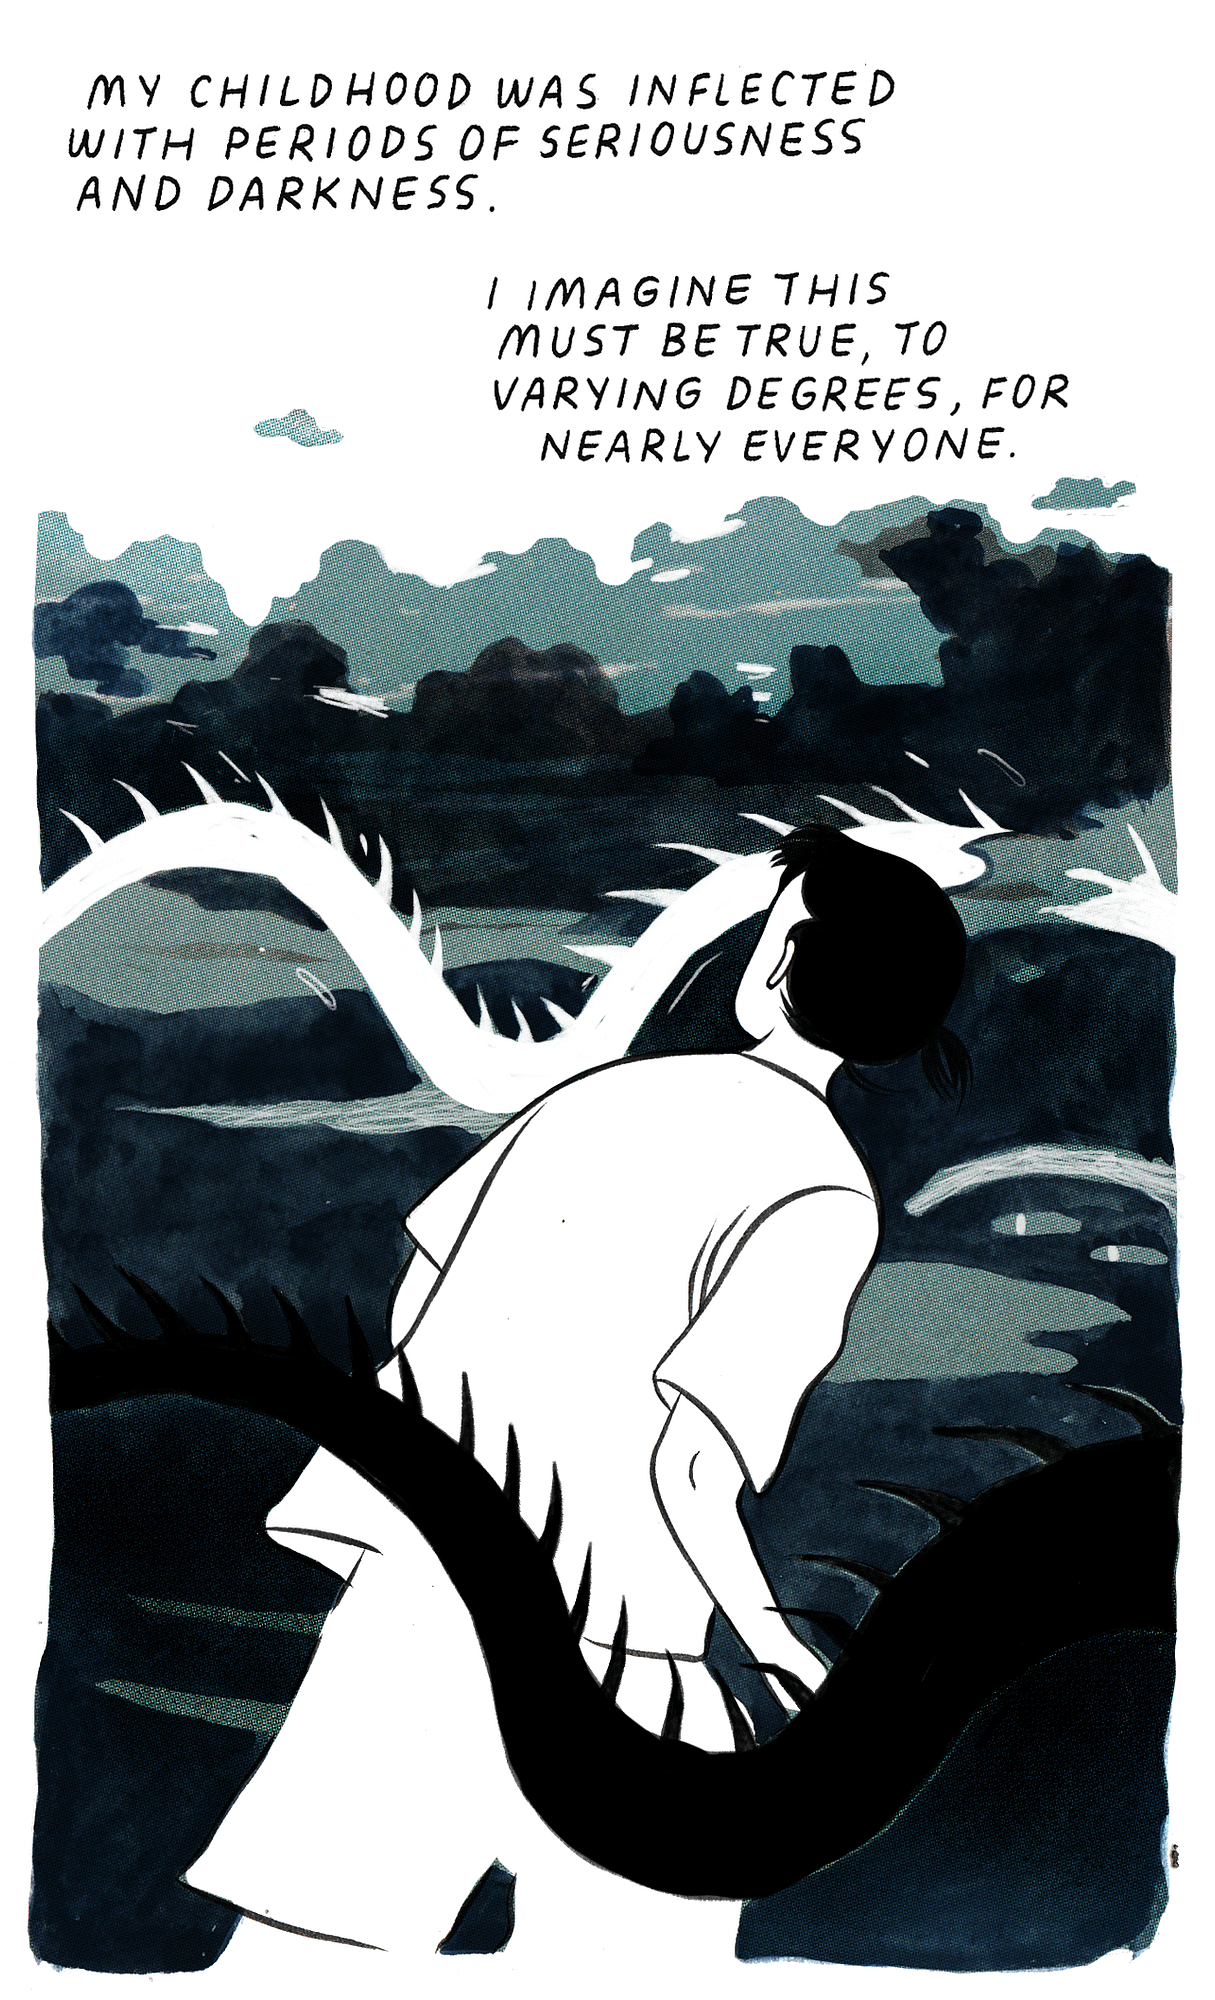 Lee walks through a landscape of light and dark blues; the dark blues look like they might be storm clouds. She’s looking over her left shoulder, away from the viewer, and we can’t see her face. The landscape is cut up by two dragon tails, one white and one black, and Lee is positioned between them. The text reads, “My childhood was inflected with periods of seriousness and darkness. I imagine this must be true, to varying degrees, for nearly everyone.”